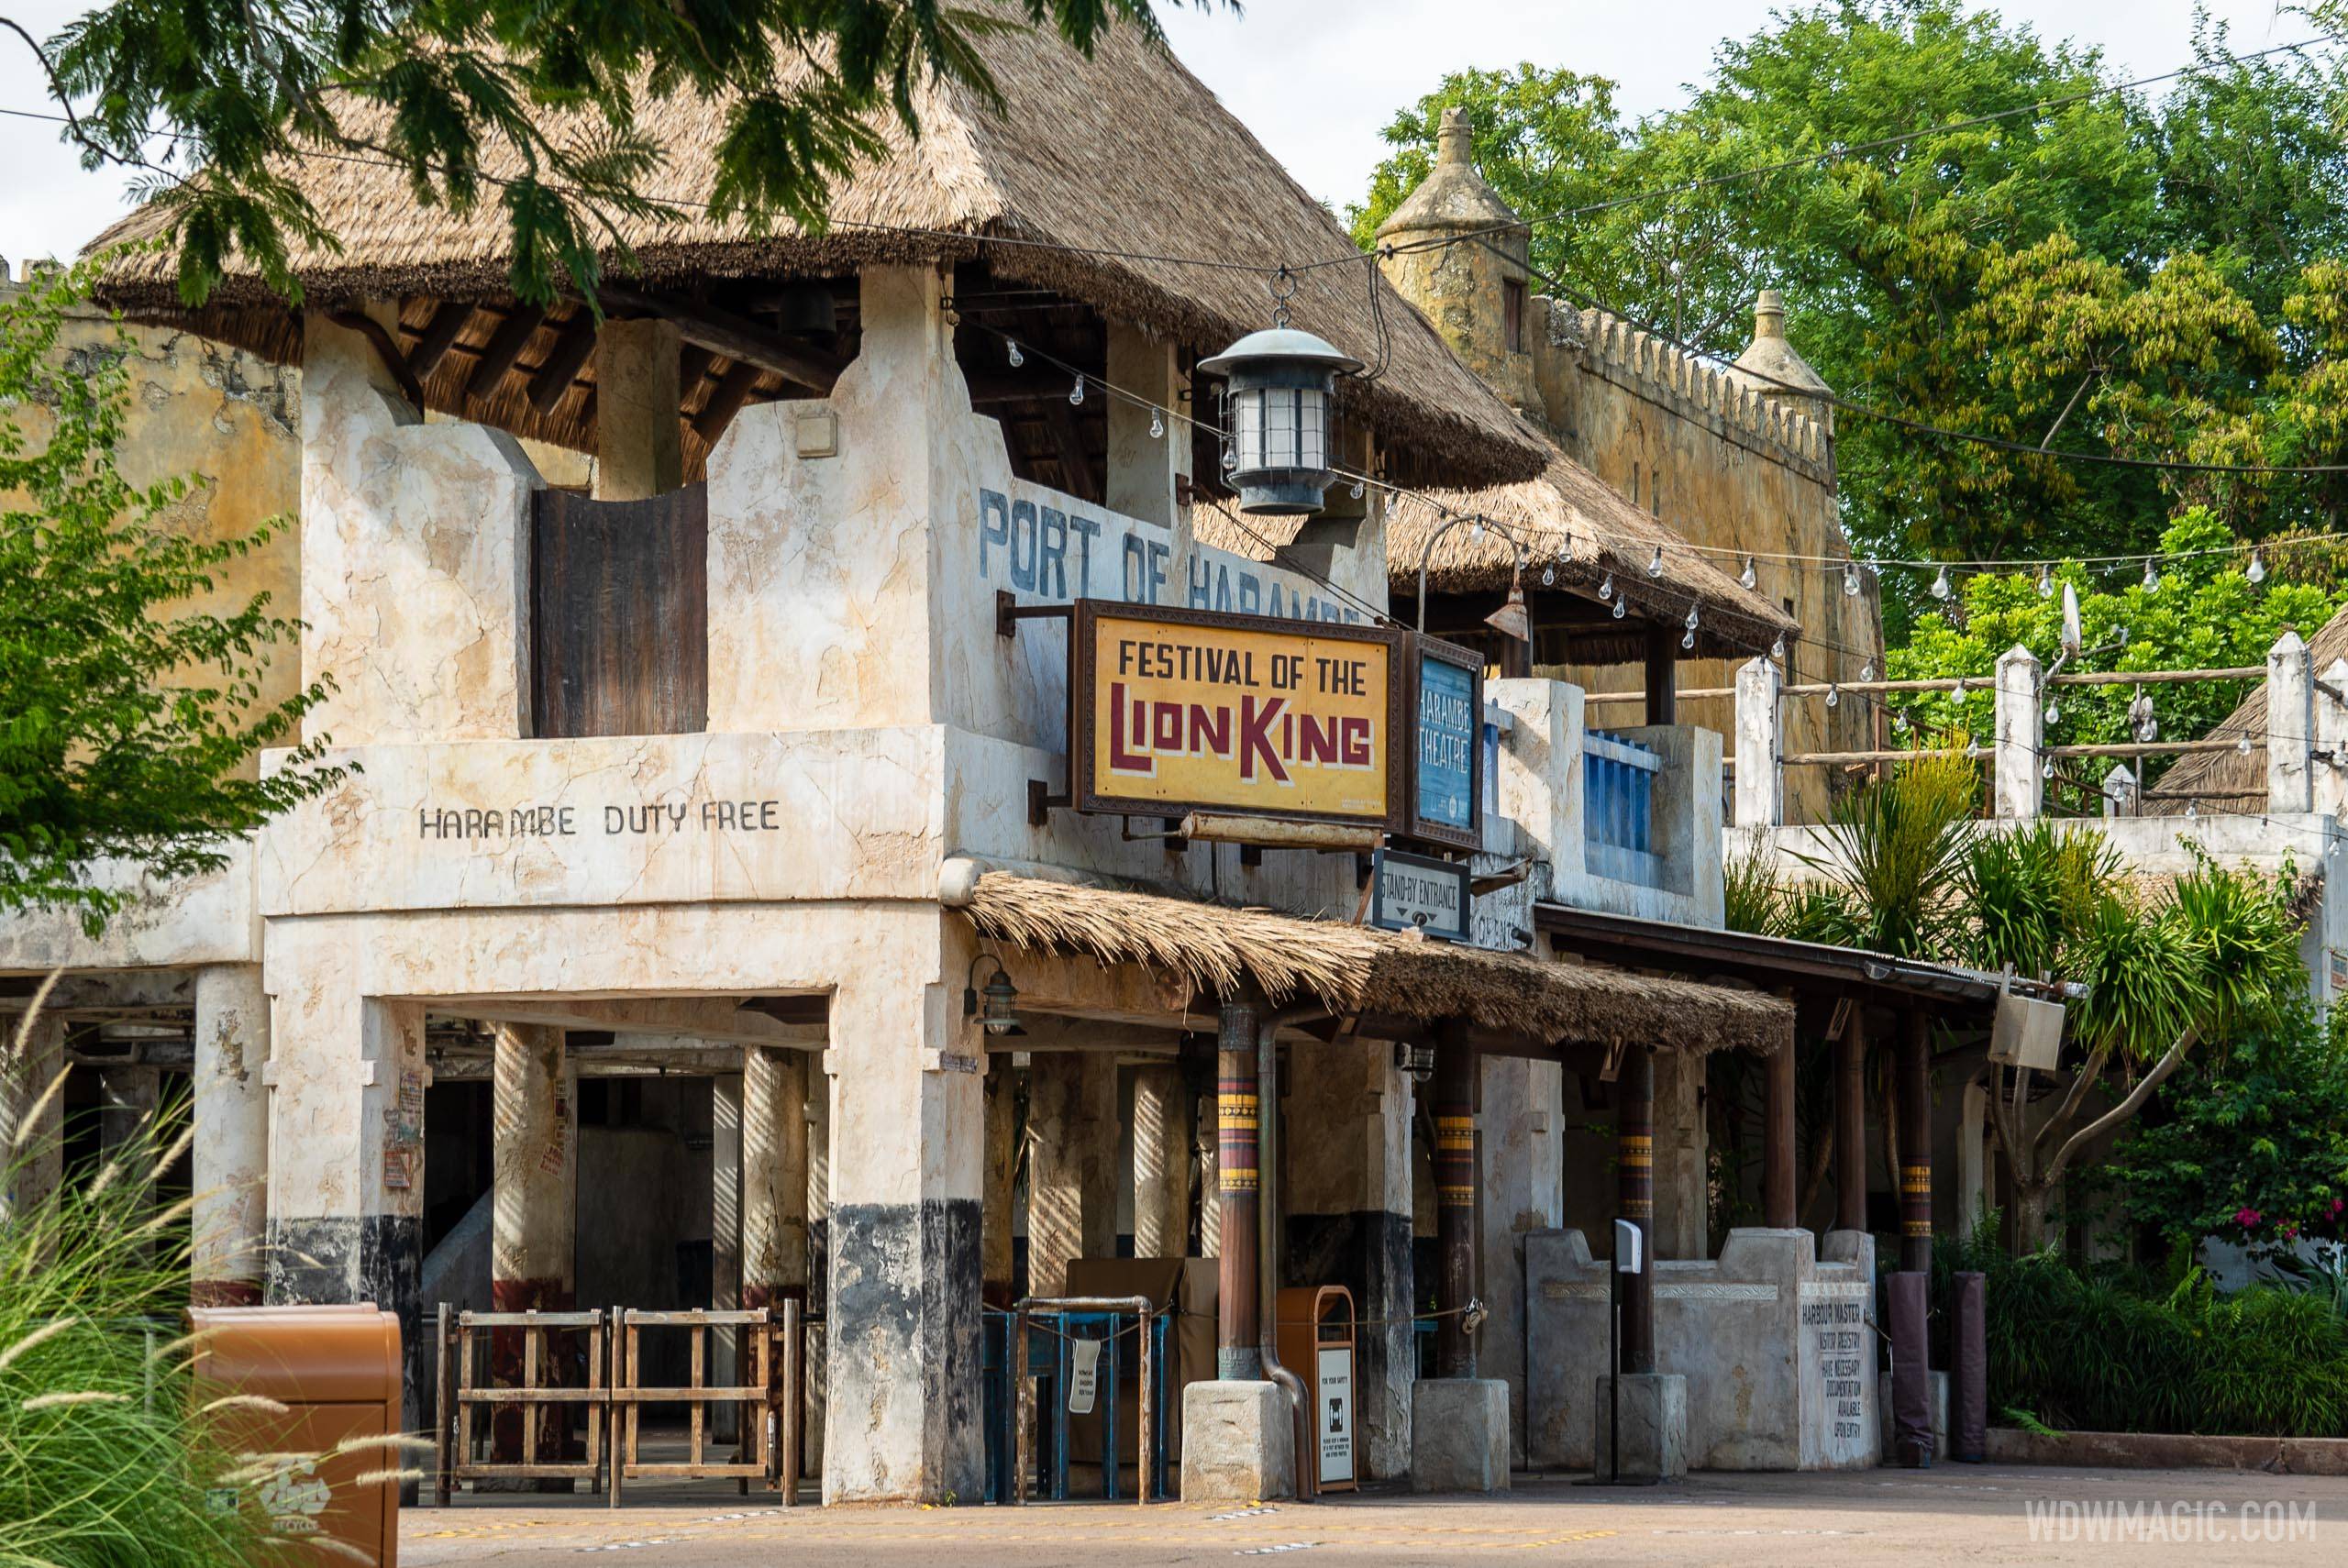 Festival of the Lion King will return this summer to Disney's Animal Kingdom